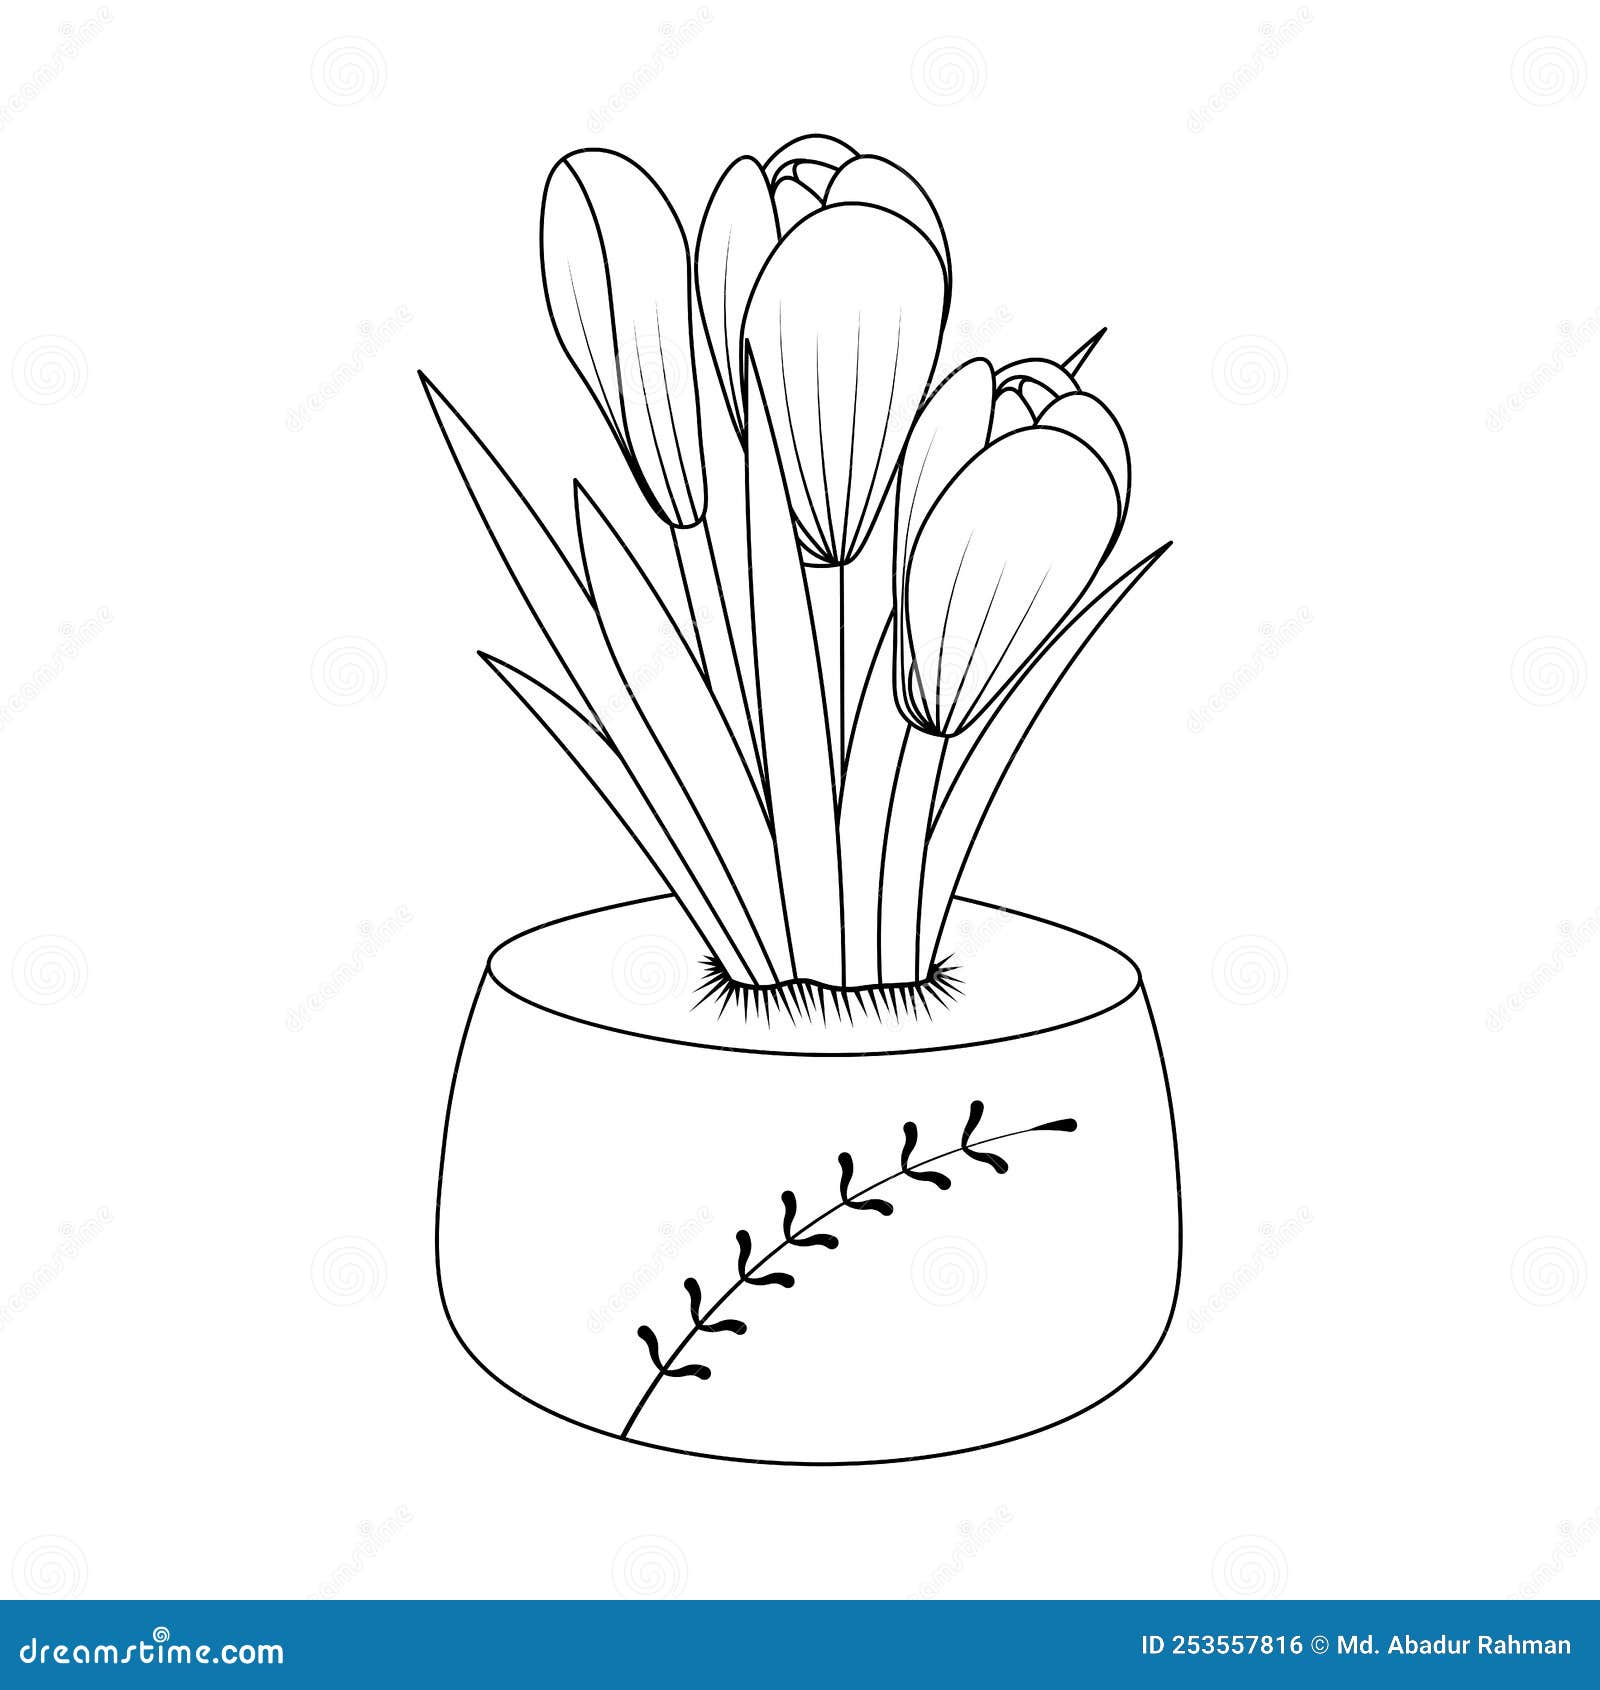 How To Draw A Flower Pot ||Easy Flower Vase Drawing & Colour Step By Step  For Beggeiner's... - YouTube | Flower vase drawing, Flower drawing, Simple  flowers